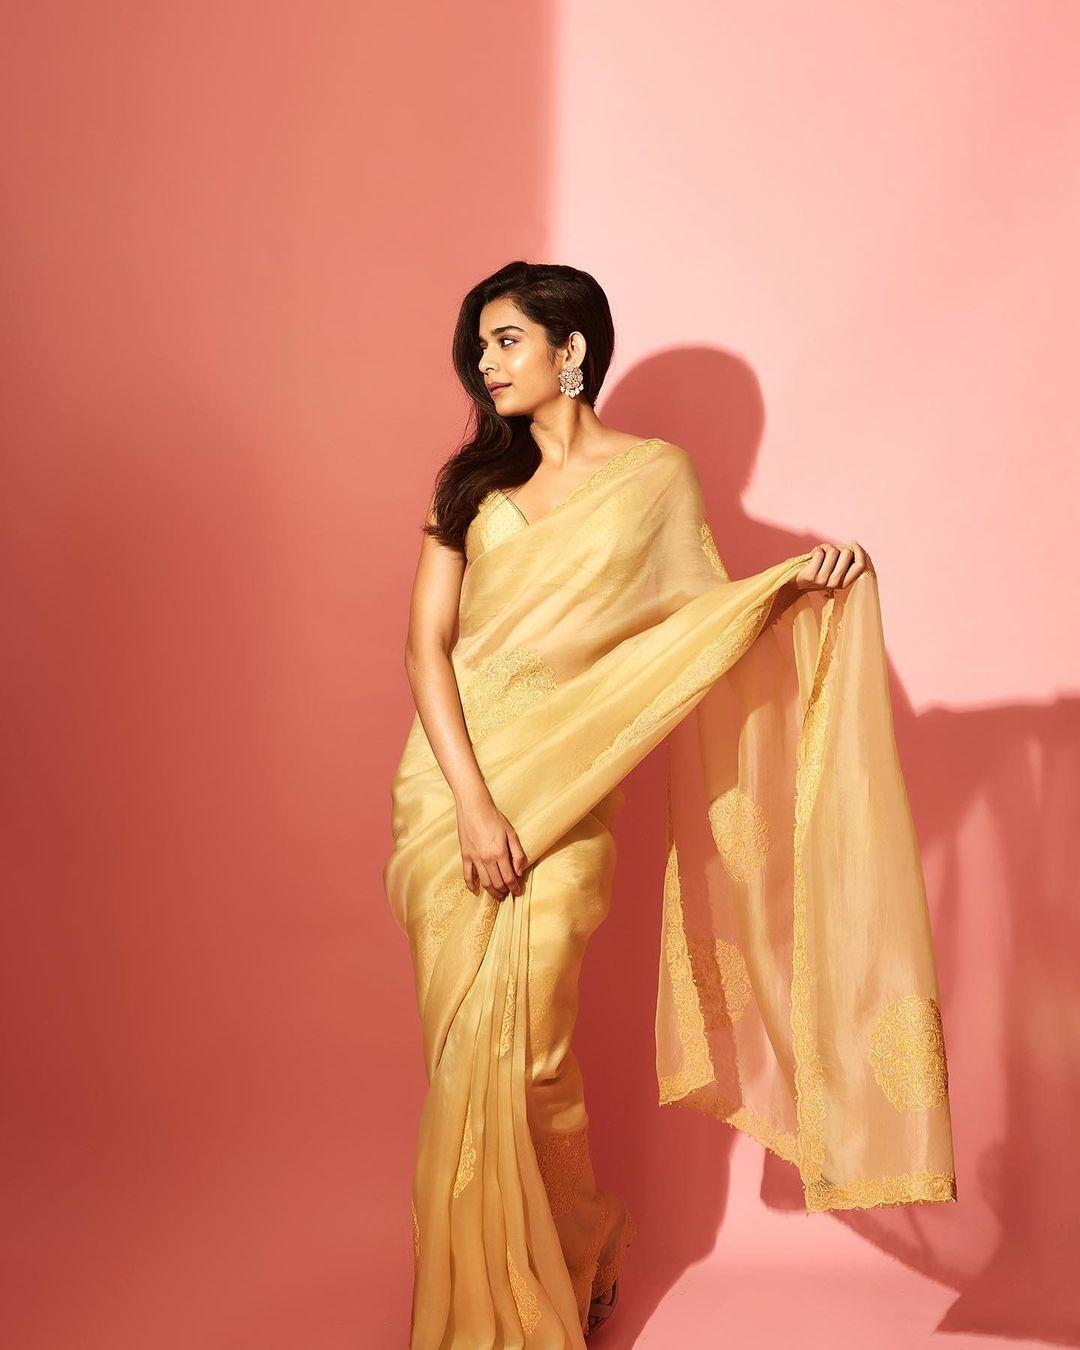 Mithila shines in a beautiful yellow saree with intricate designs